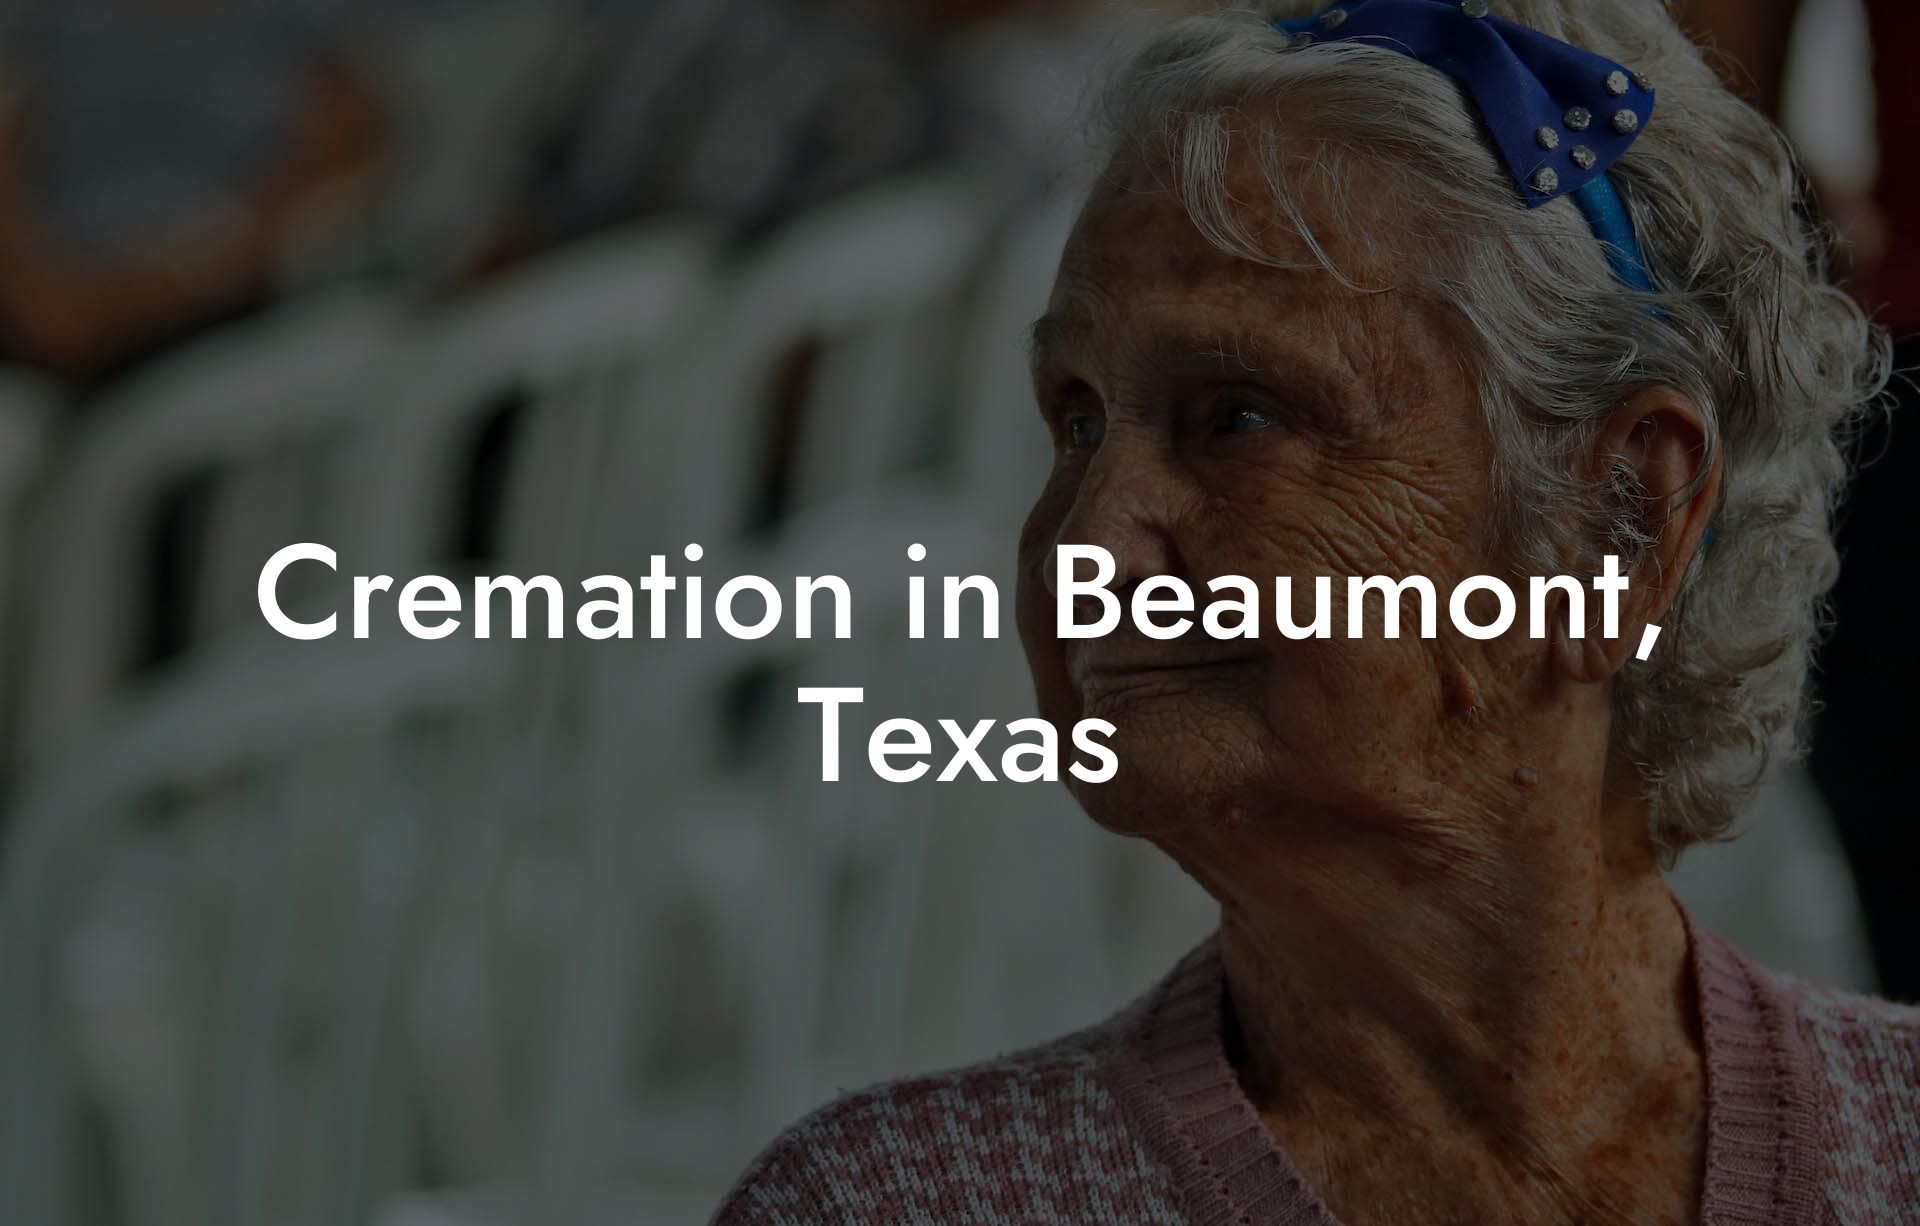 Cremation in Beaumont, Texas